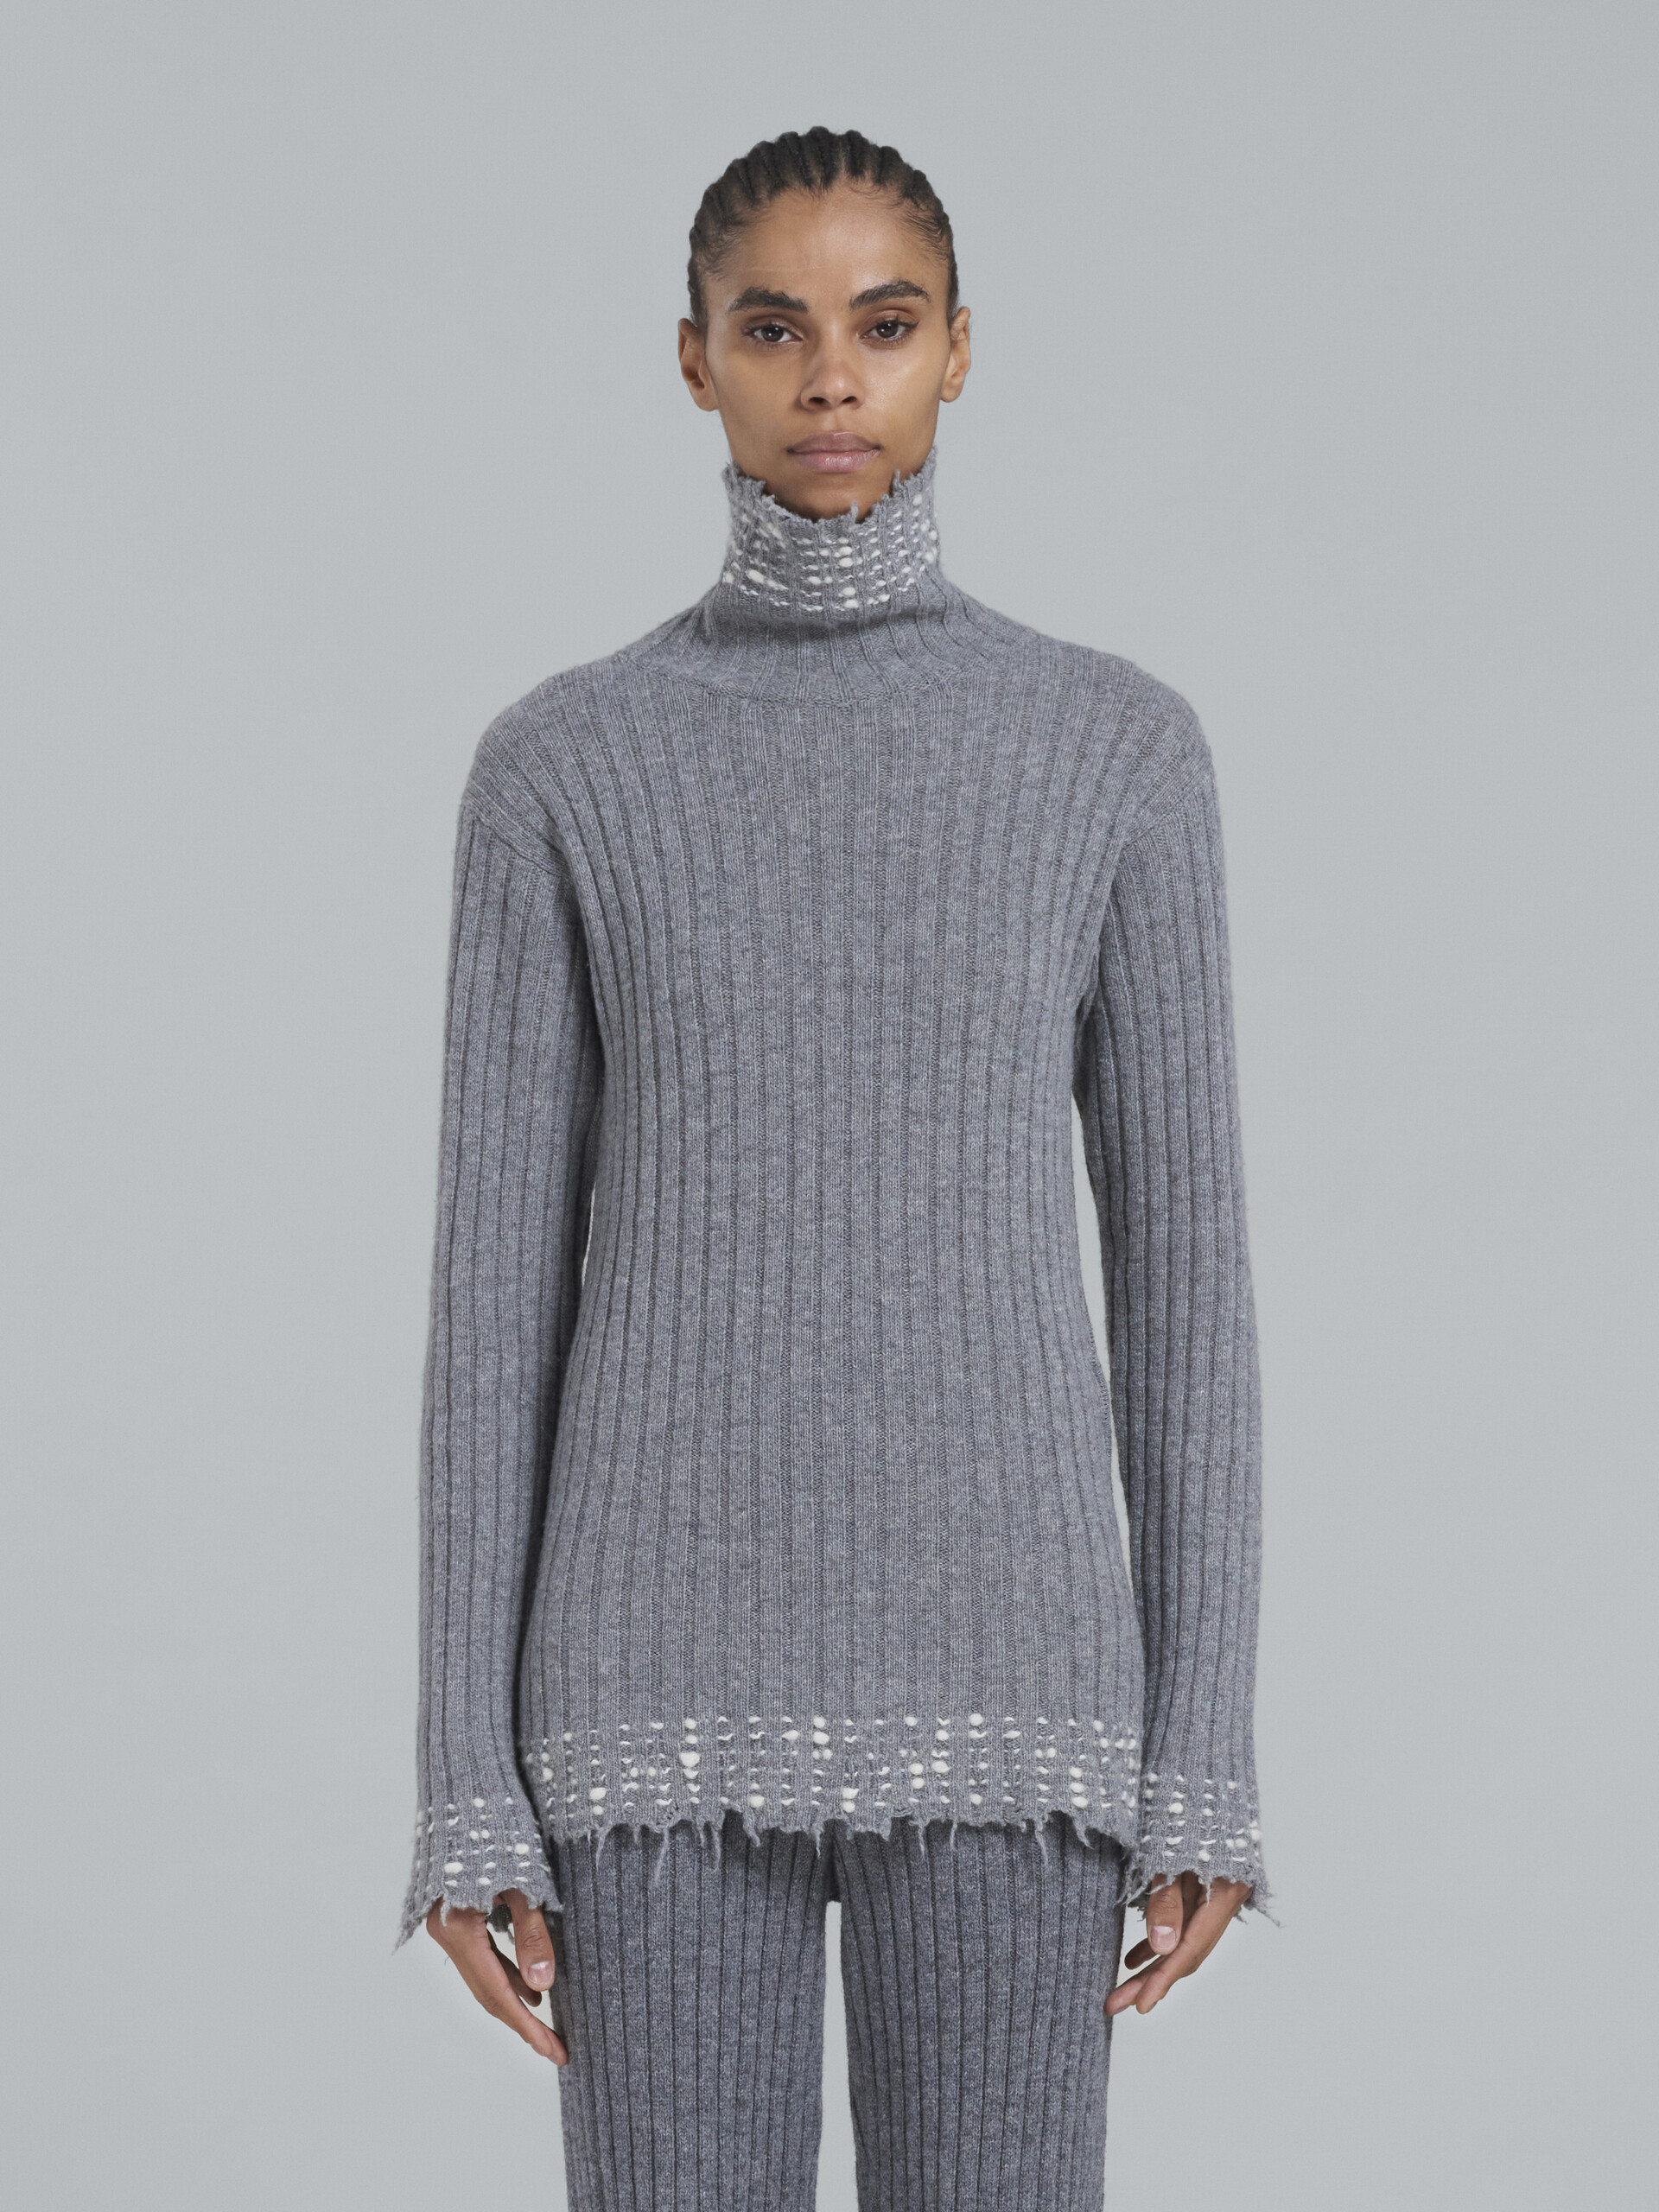 Grey knitted turtleneck - Pullovers - Image 2